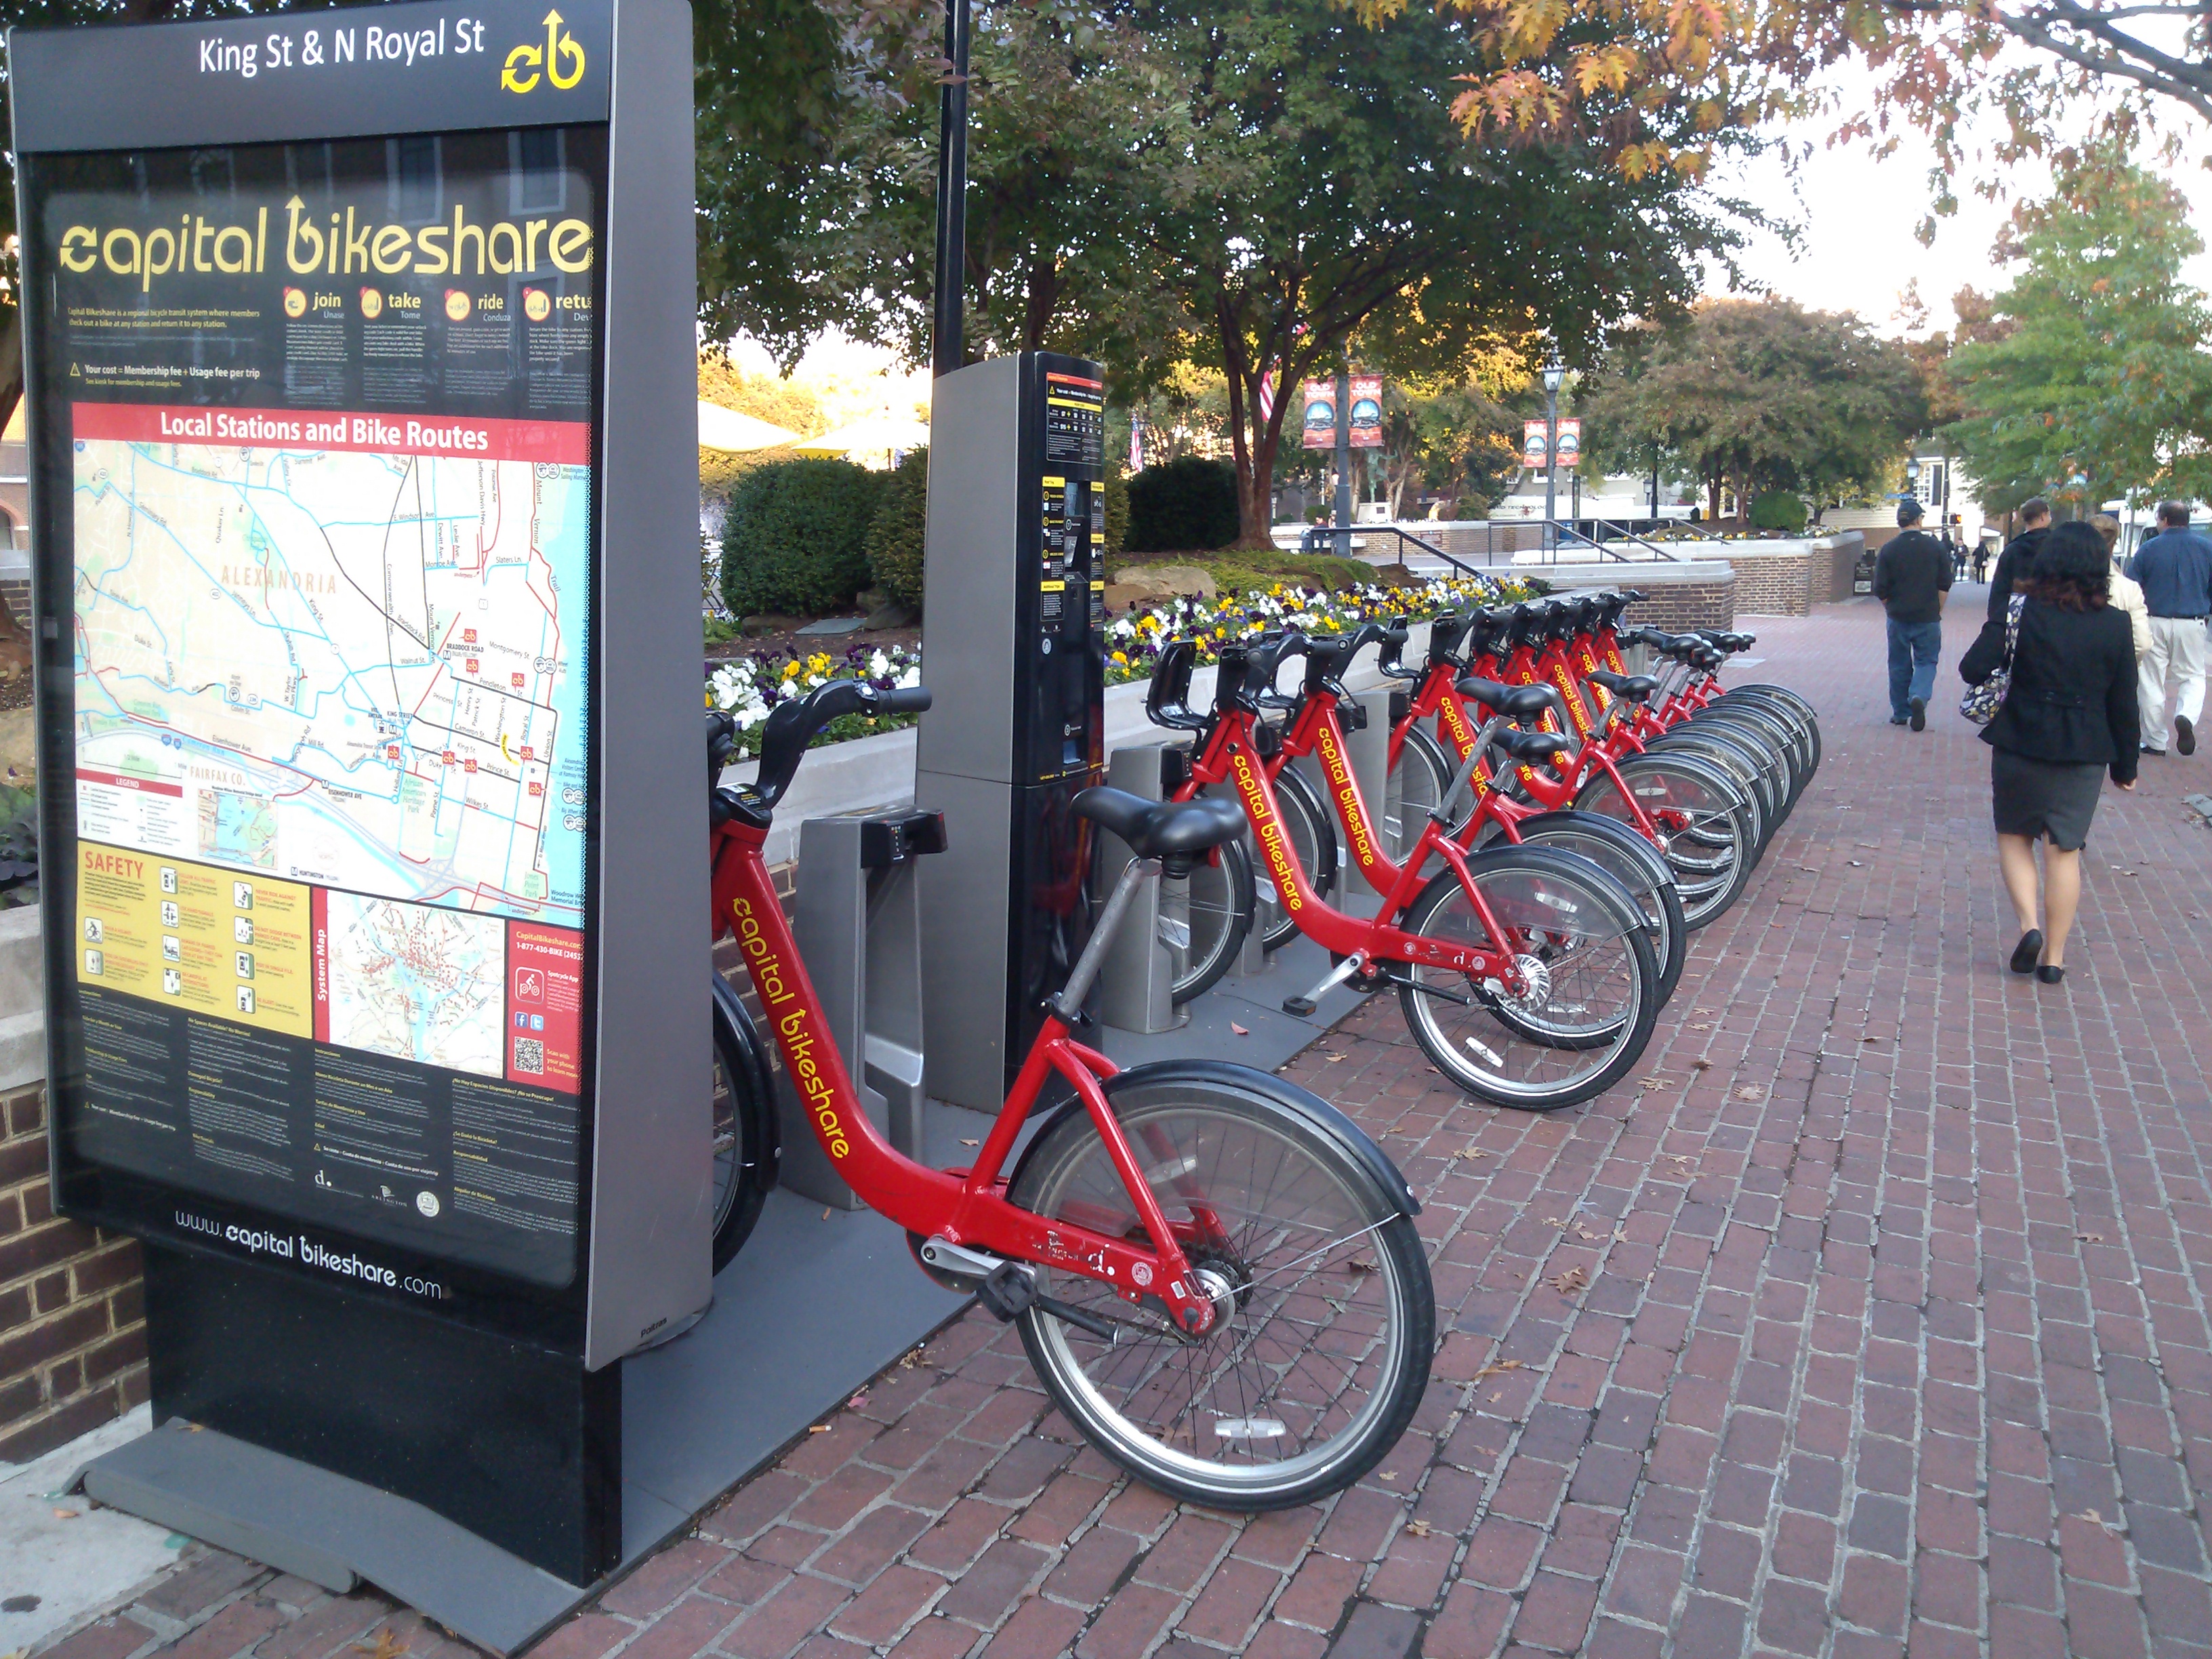 Bikeshare is a great option for people trying to get around Old Town